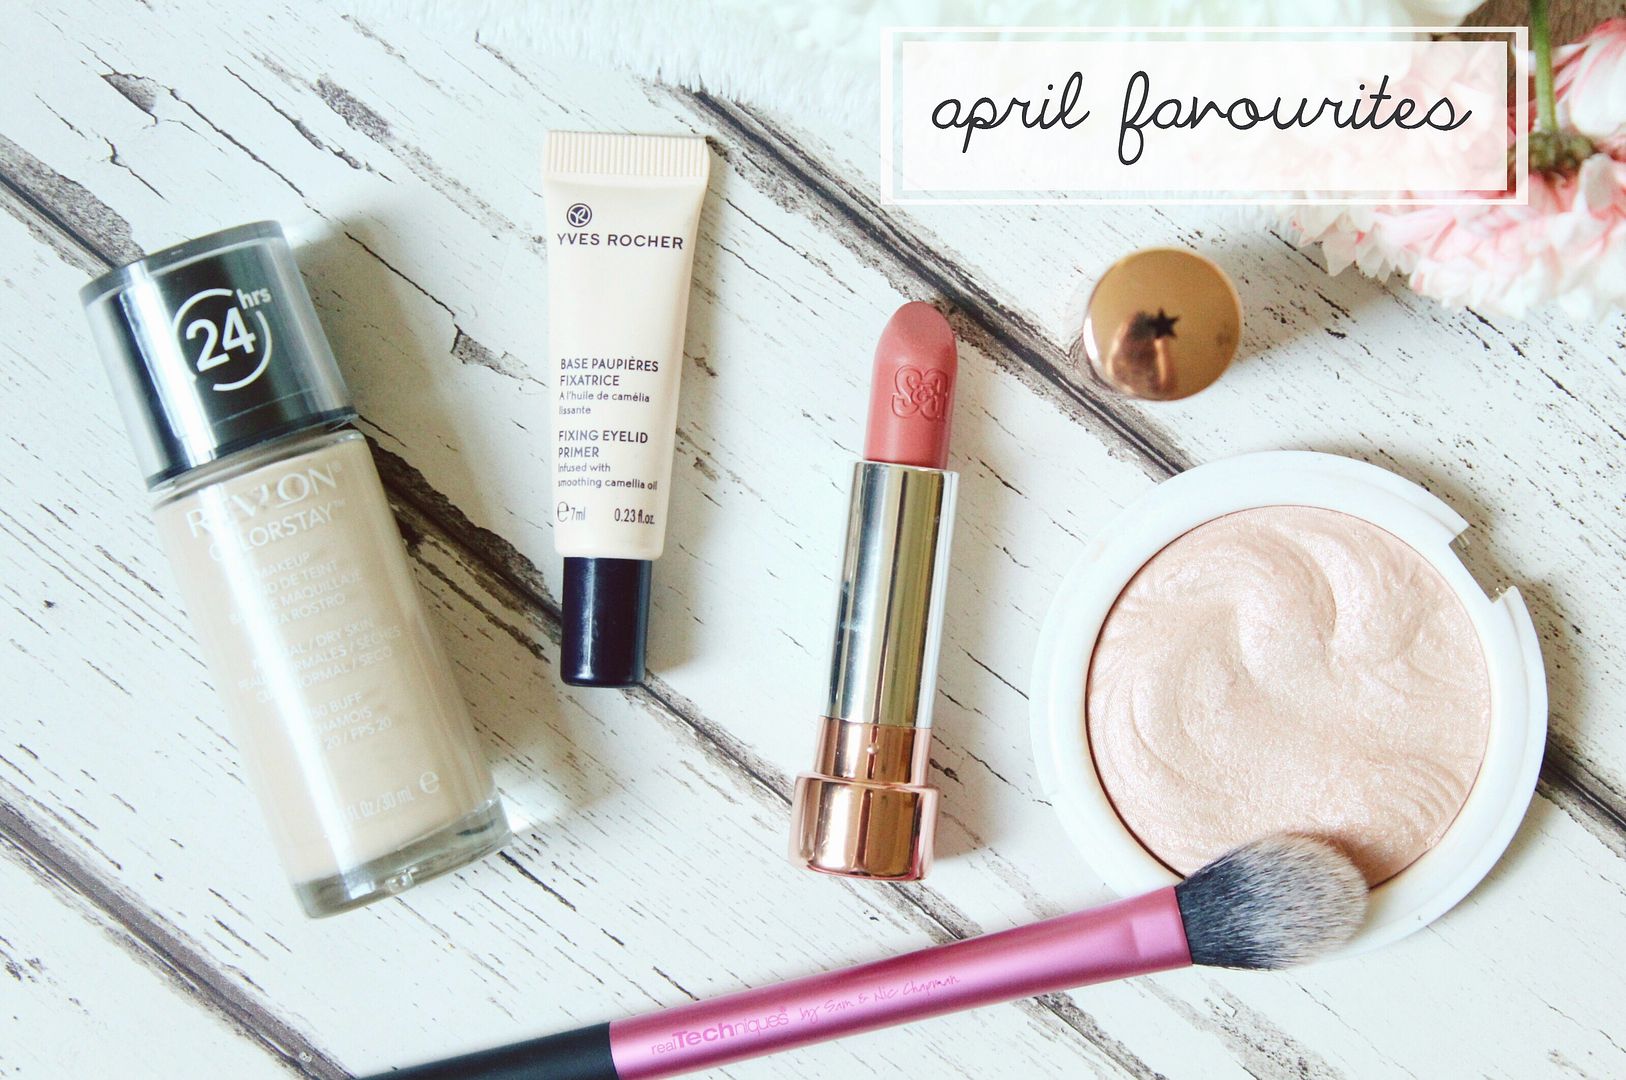 April 2016 Monthly Favourites Makeup Revlon Yves Rocher Soap And Glory MUA Real Techniques Belle-Amie UK Beauty Fashion Lifestyle Blog